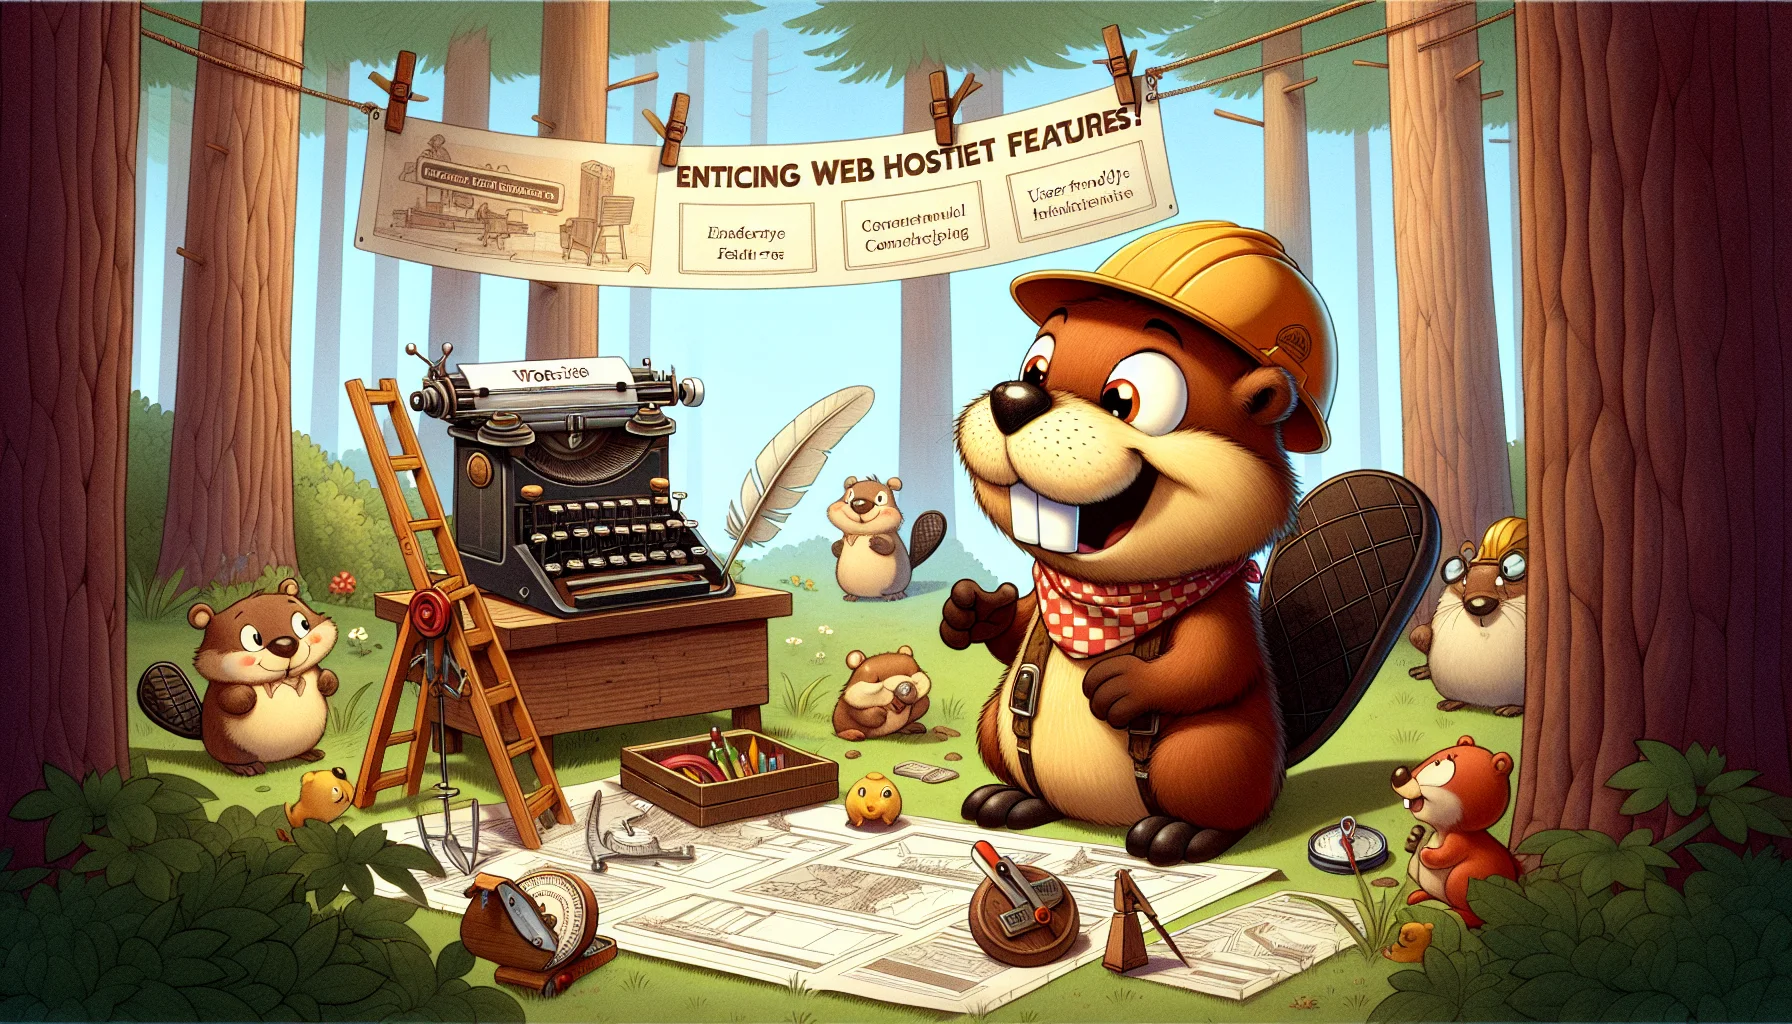 Imagine a humorous scenario where a cute Anthropomorphic beaver, known for his construction skills, is using an array of vintage tools like a typewriter, compass, and quill pen to build a 'website'. The beaver wears a hard hat, with blueprints spread out in front of him highlighting user-friendly features. The setting is in a playful forest with other animals gathered around, watching in awe as the beaver 'constructs' the website. A banner in the background, hung between two tall trees advertises 'Enticing Web Hosting'. This scene brings together the charm of nature and the world of website building in a delightful mix.